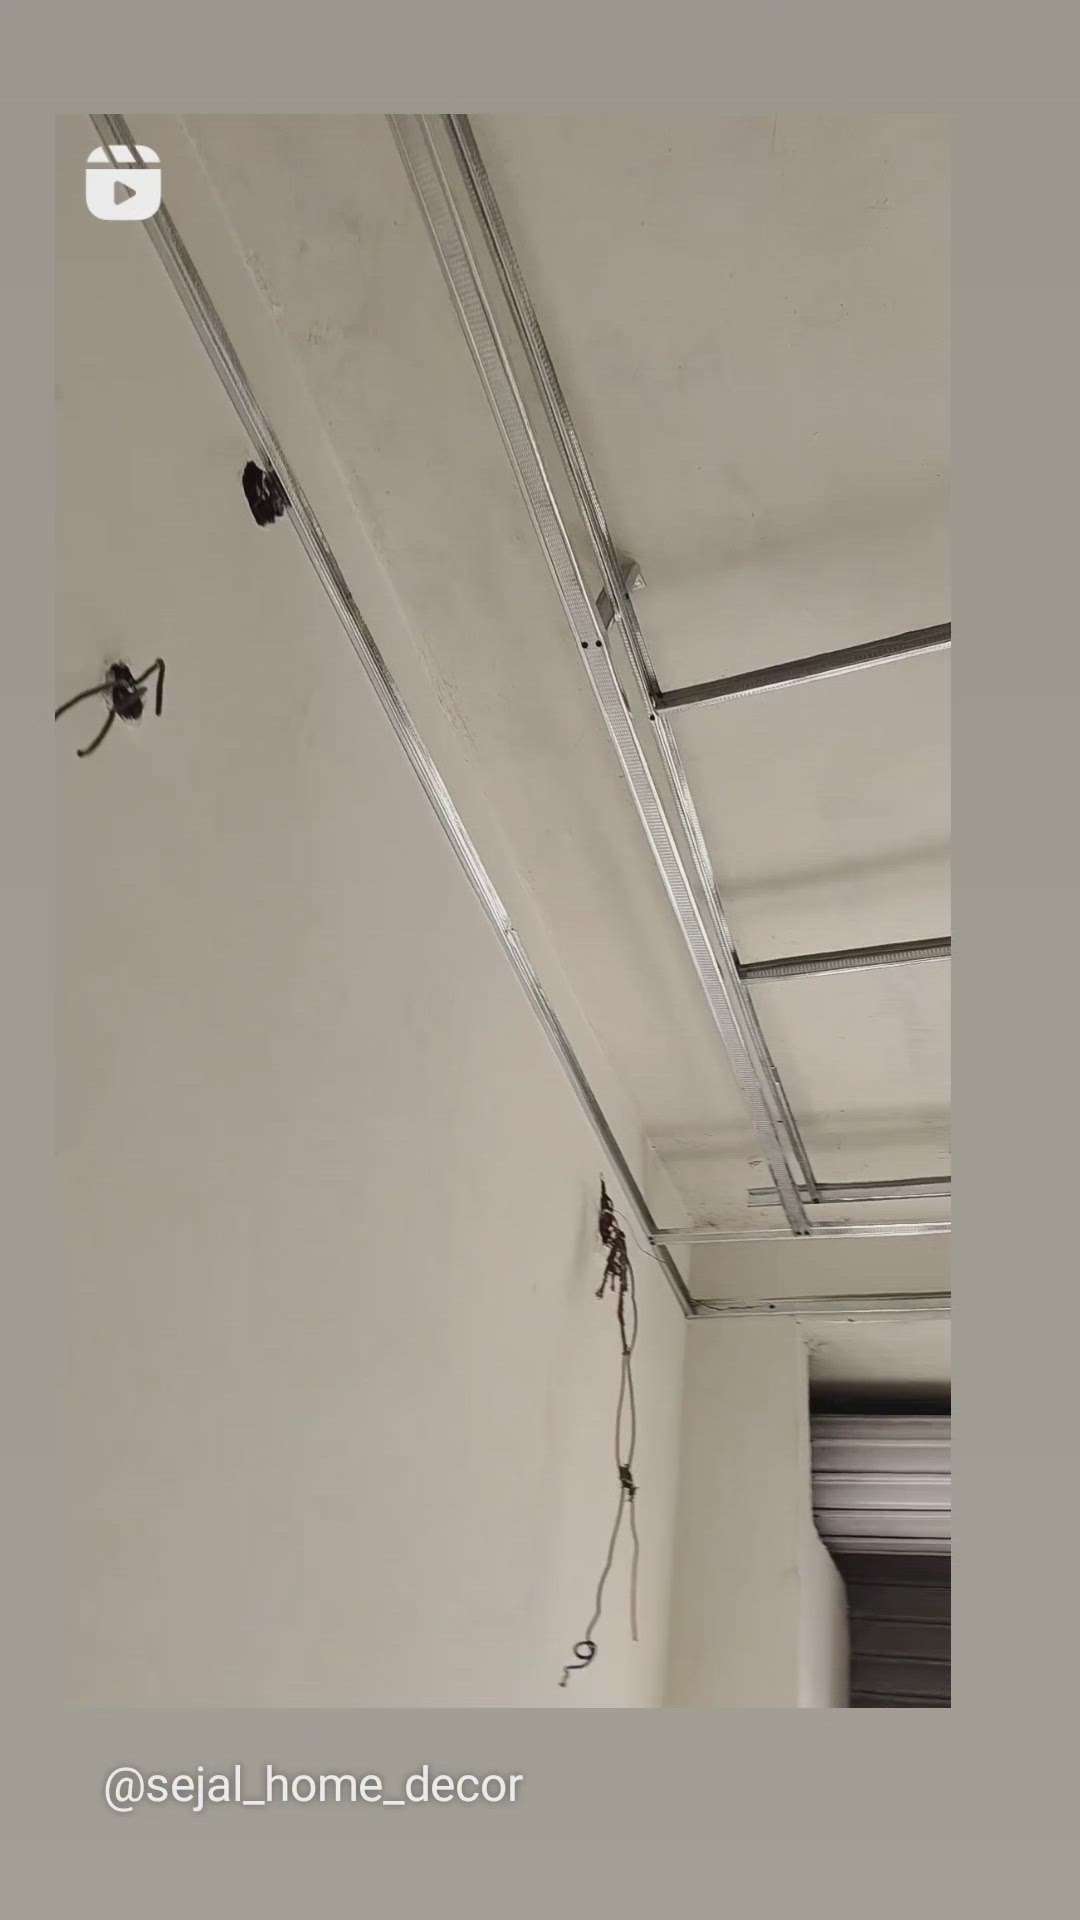 PVC ceiling work available
140 square feet